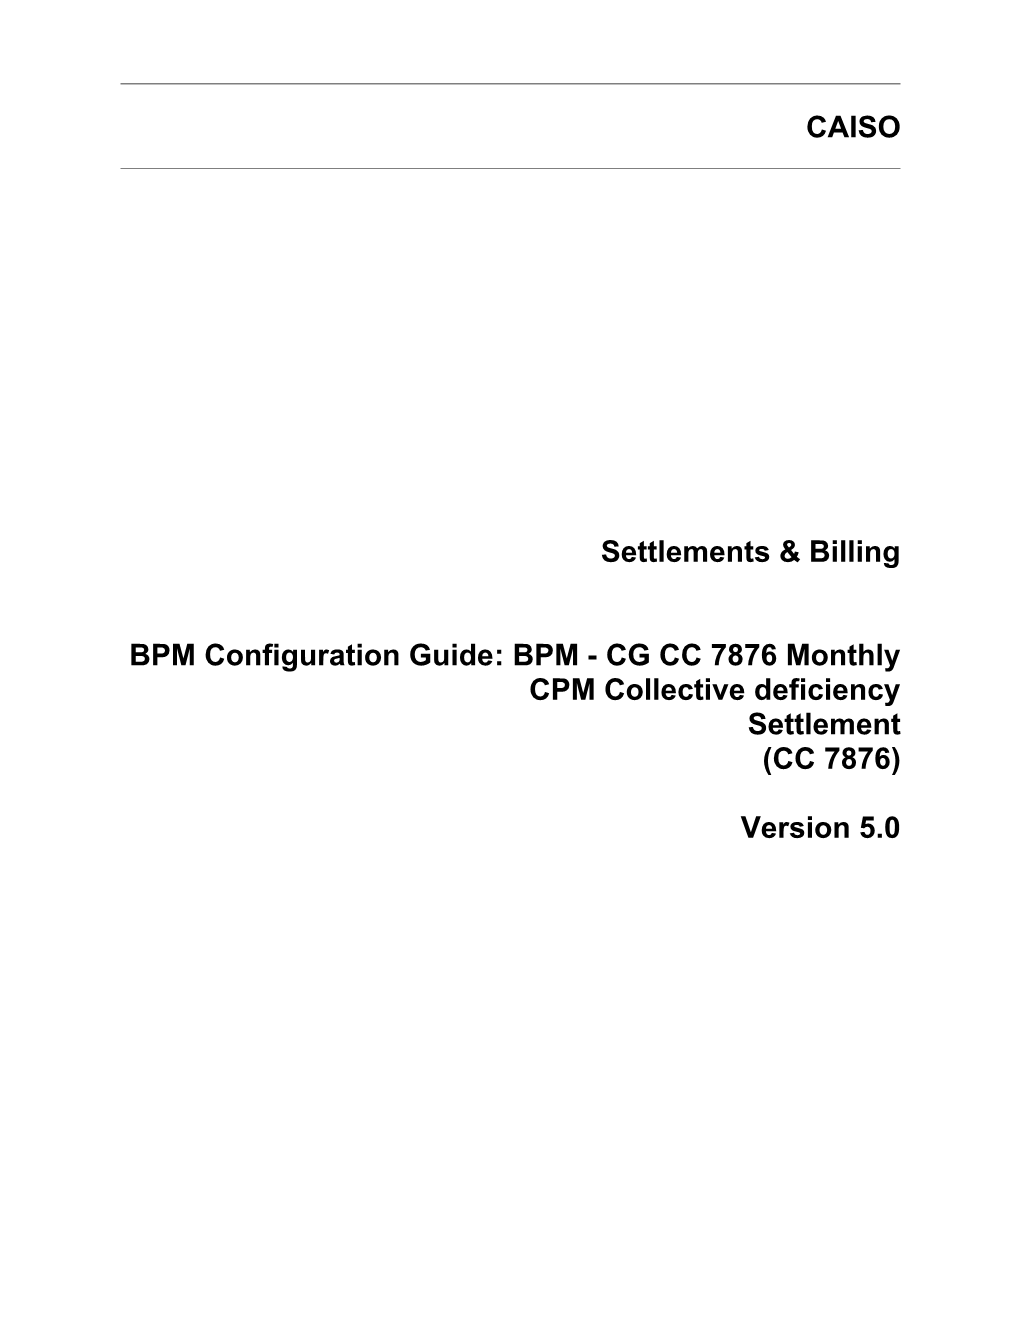 BPM - CG CC 7876 Monthly CPM Collective Deficiency Settlement